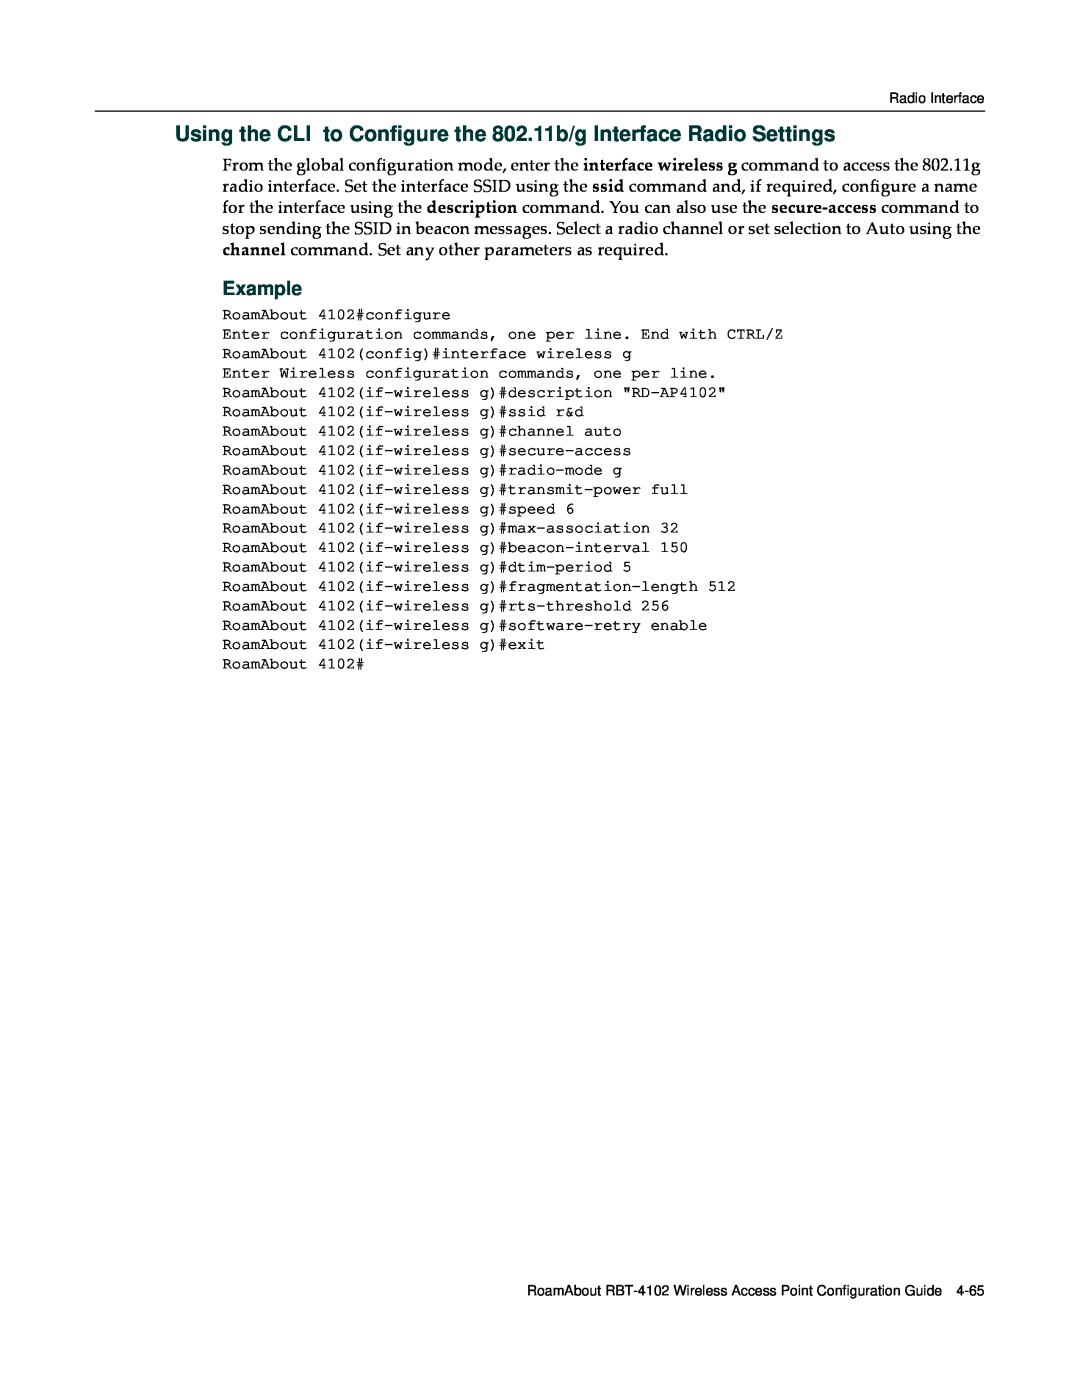 Enterasys Networks RBT-4102 manual Using the CLI to Configure the 802.11b/g Interface Radio Settings, Example 